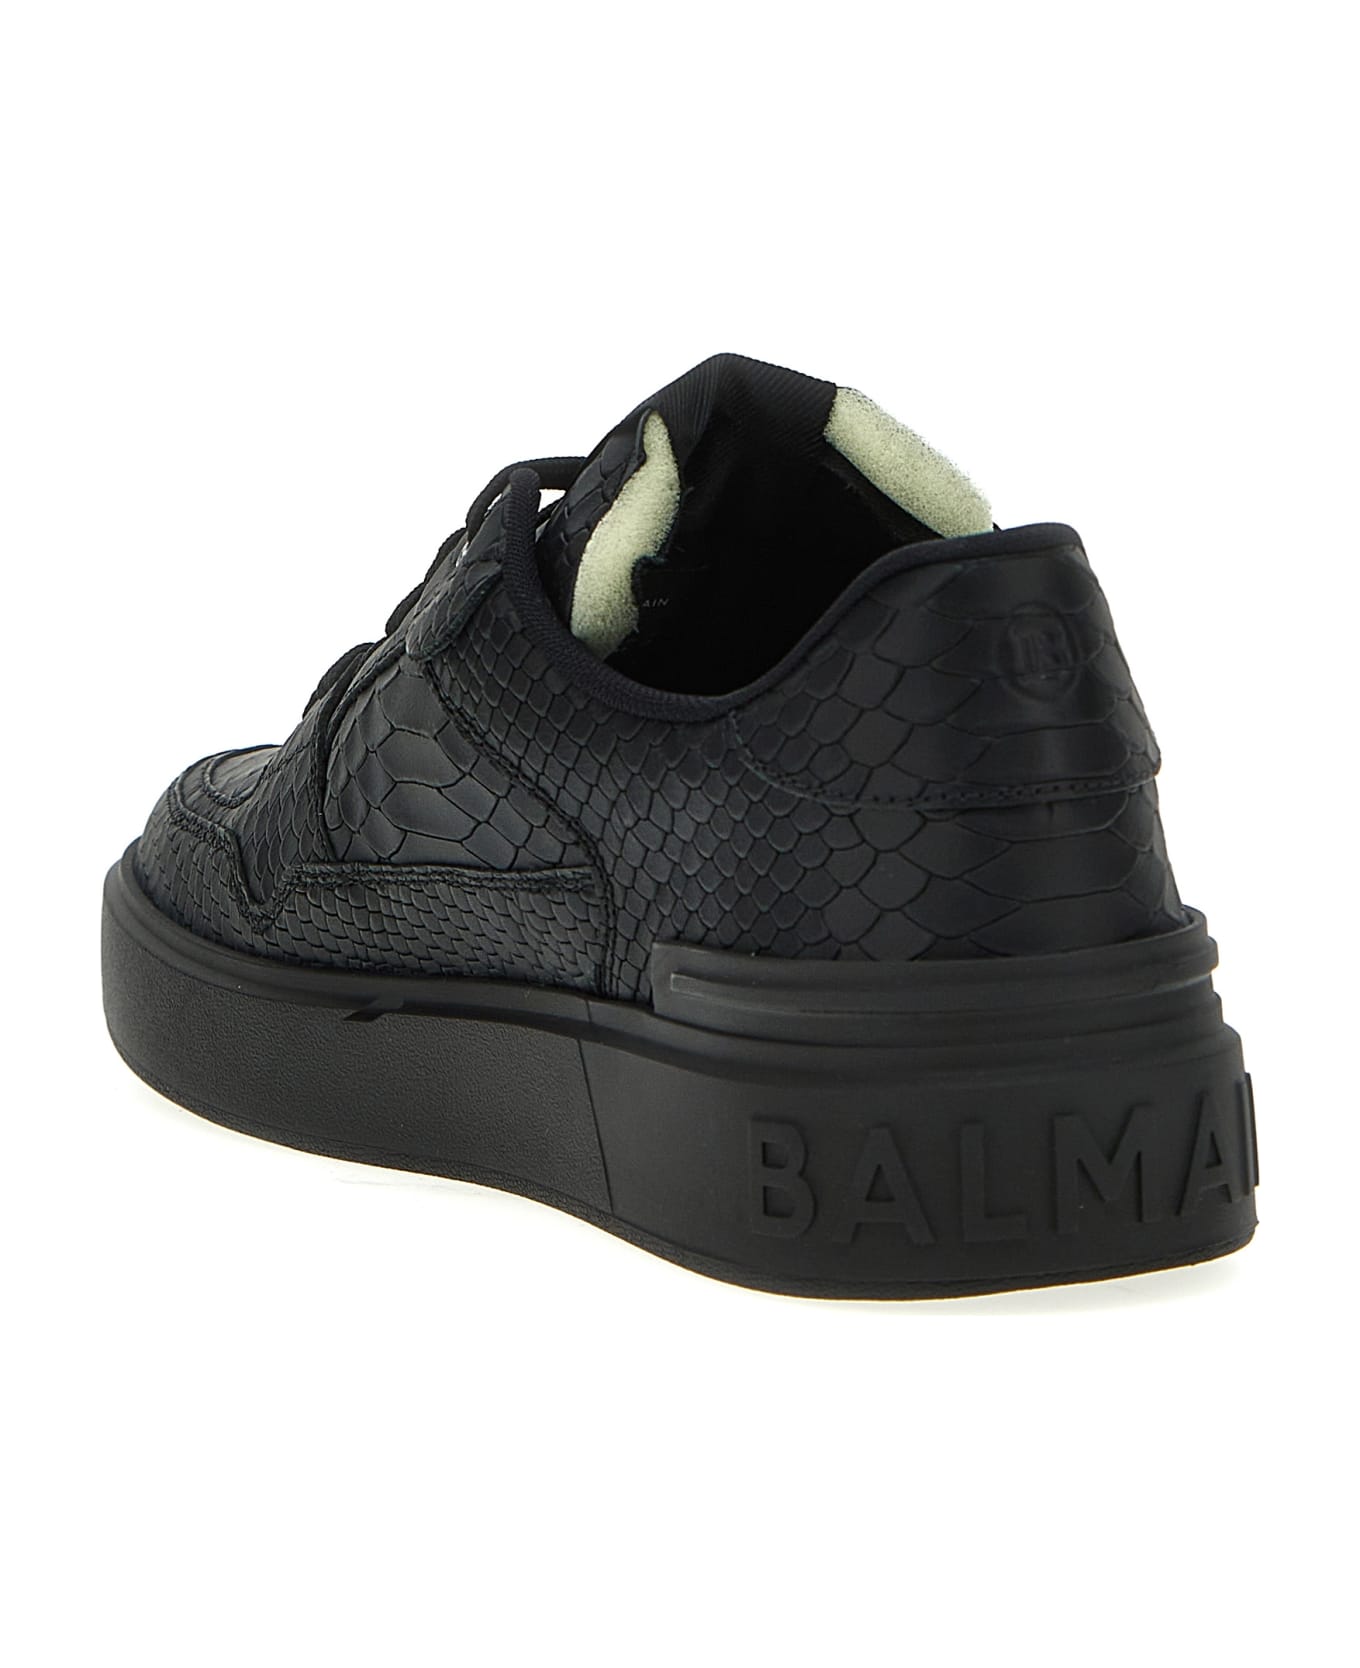 Balmain B-court Leather And Leather Sneakers - Black スニーカー